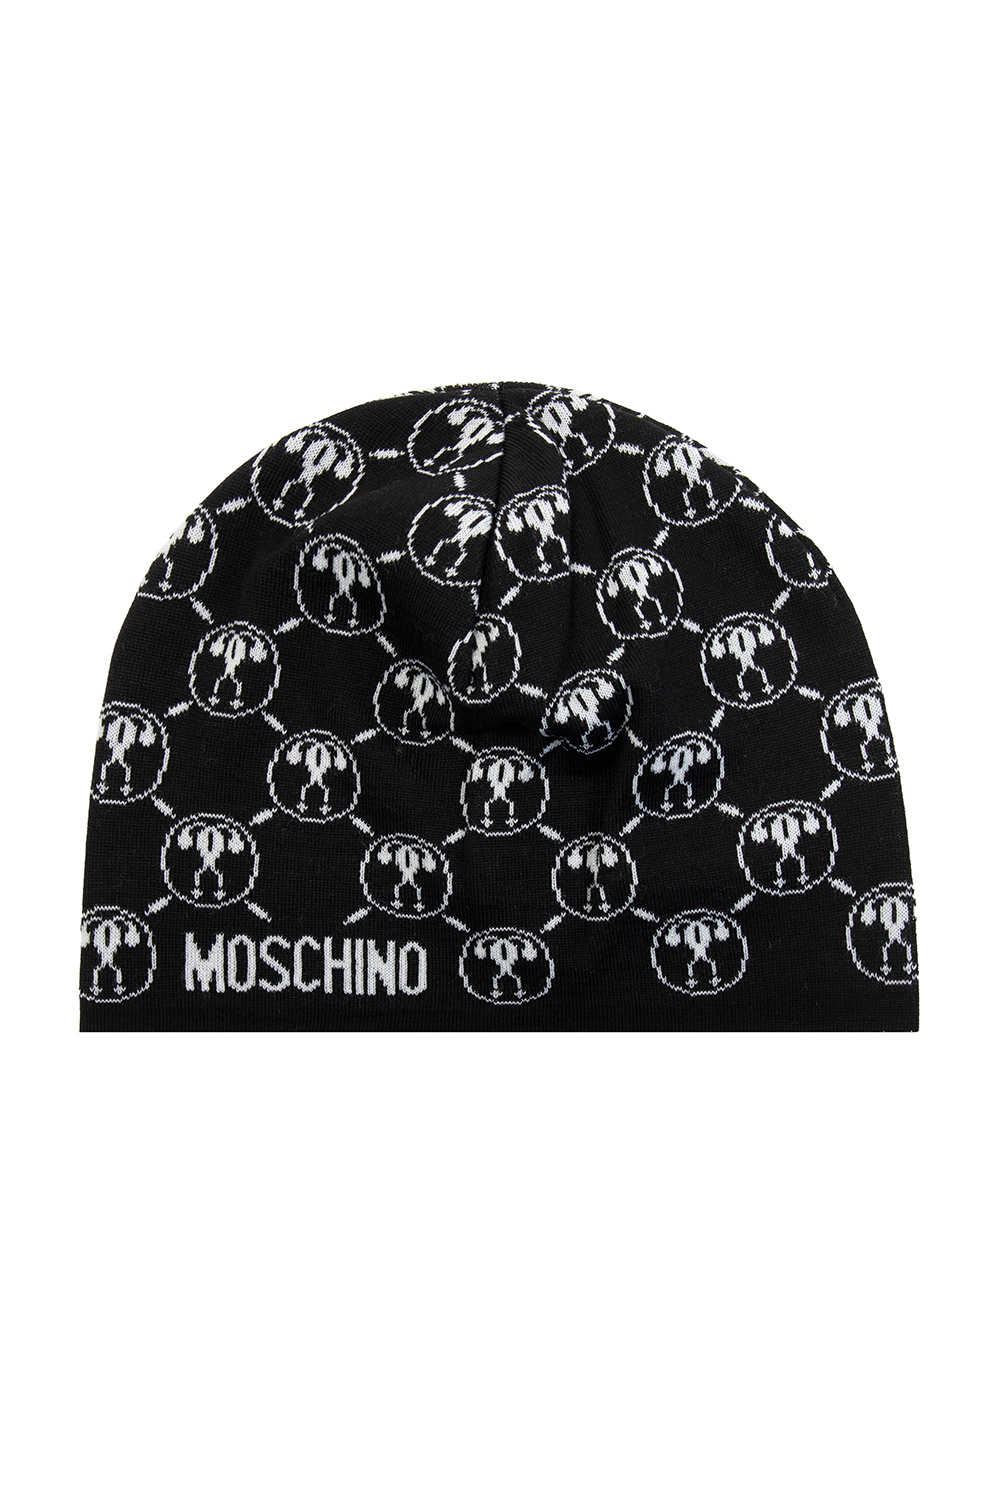 Moschino Hat with logo